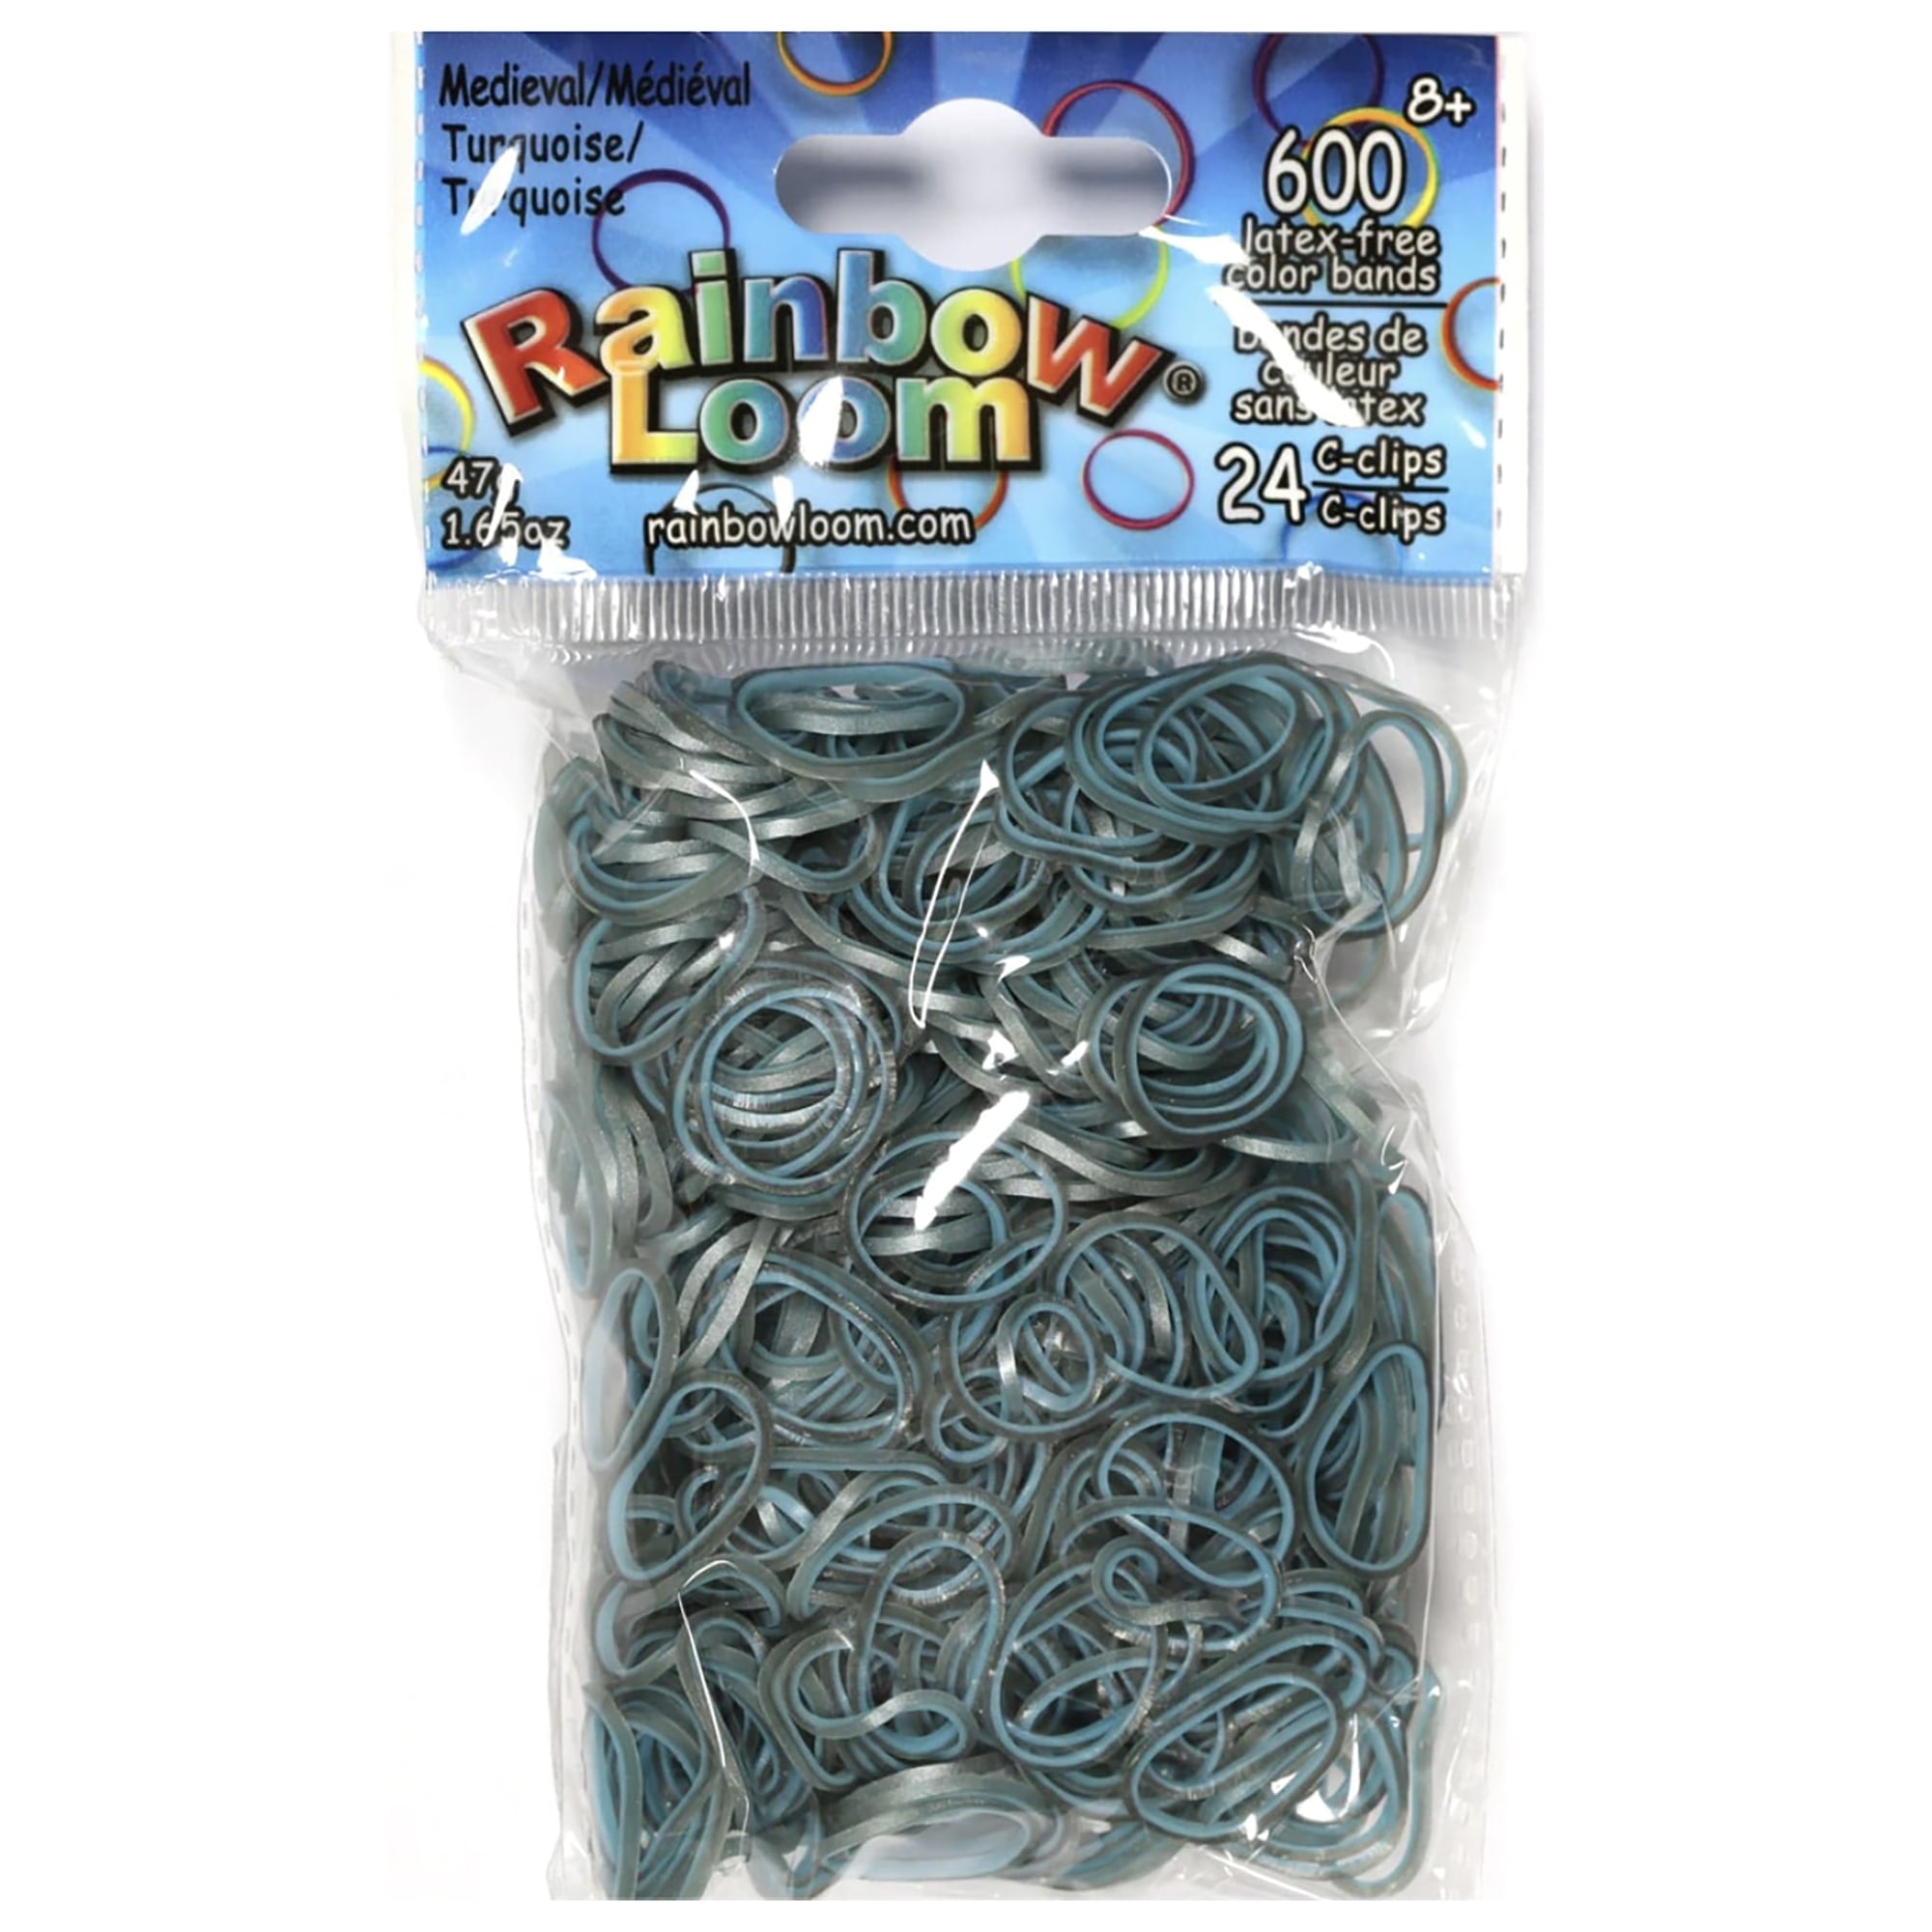 The Beadery Wonder Loom Kit, Gift for Kids, Includes 600 Rubber